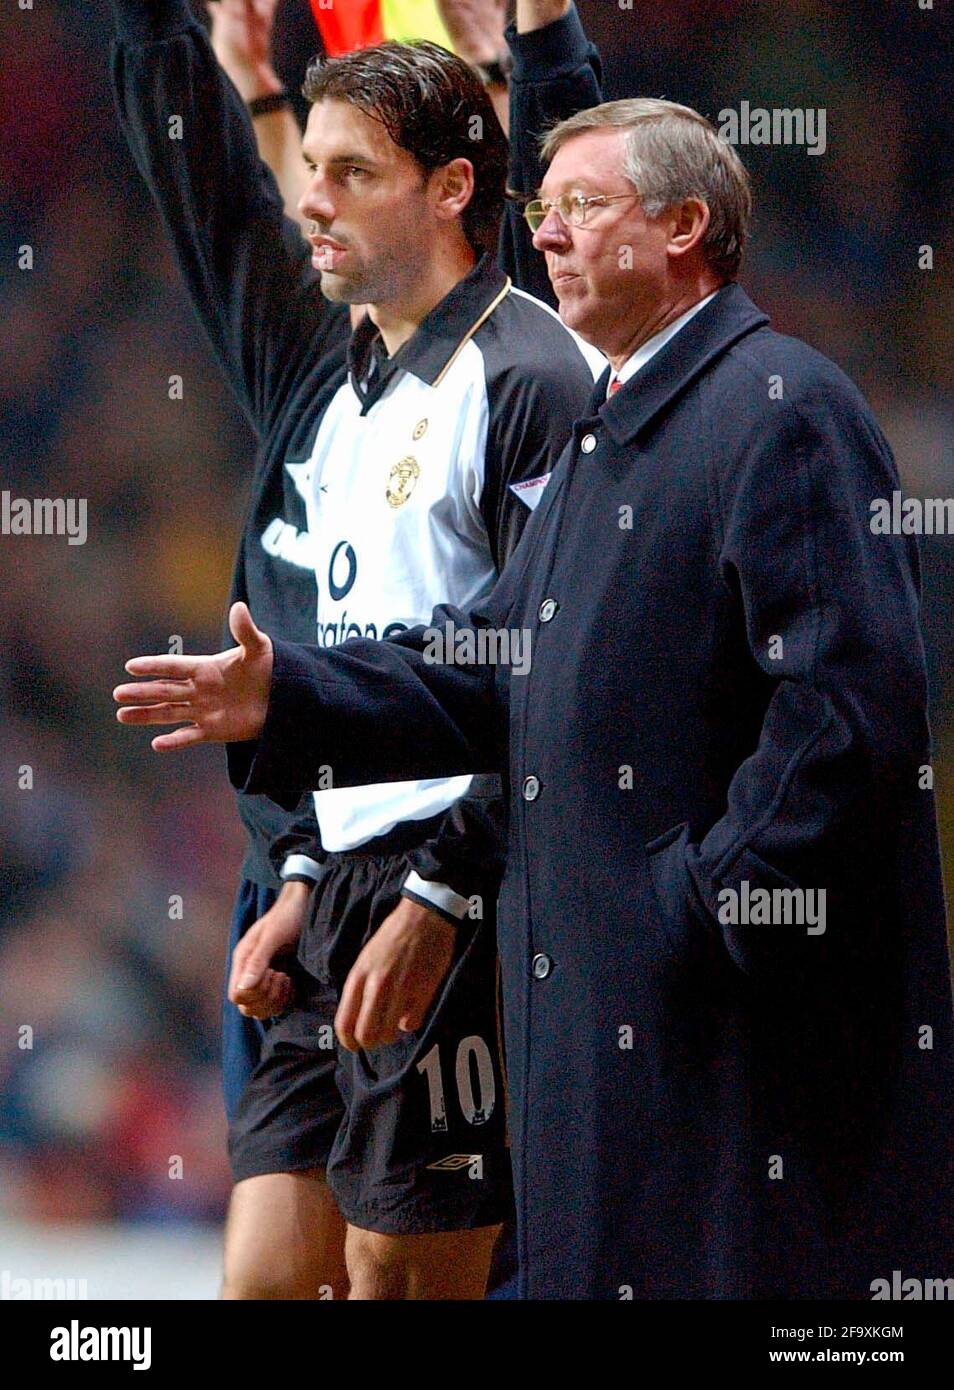 FA CUP ASTON VILLA V MAN UTD 6/1/2002 RUND VAN NISTELROOY ABOUT TO COME ON PICTURE DAVID ASHDOWN.FA CUP Stock Photo